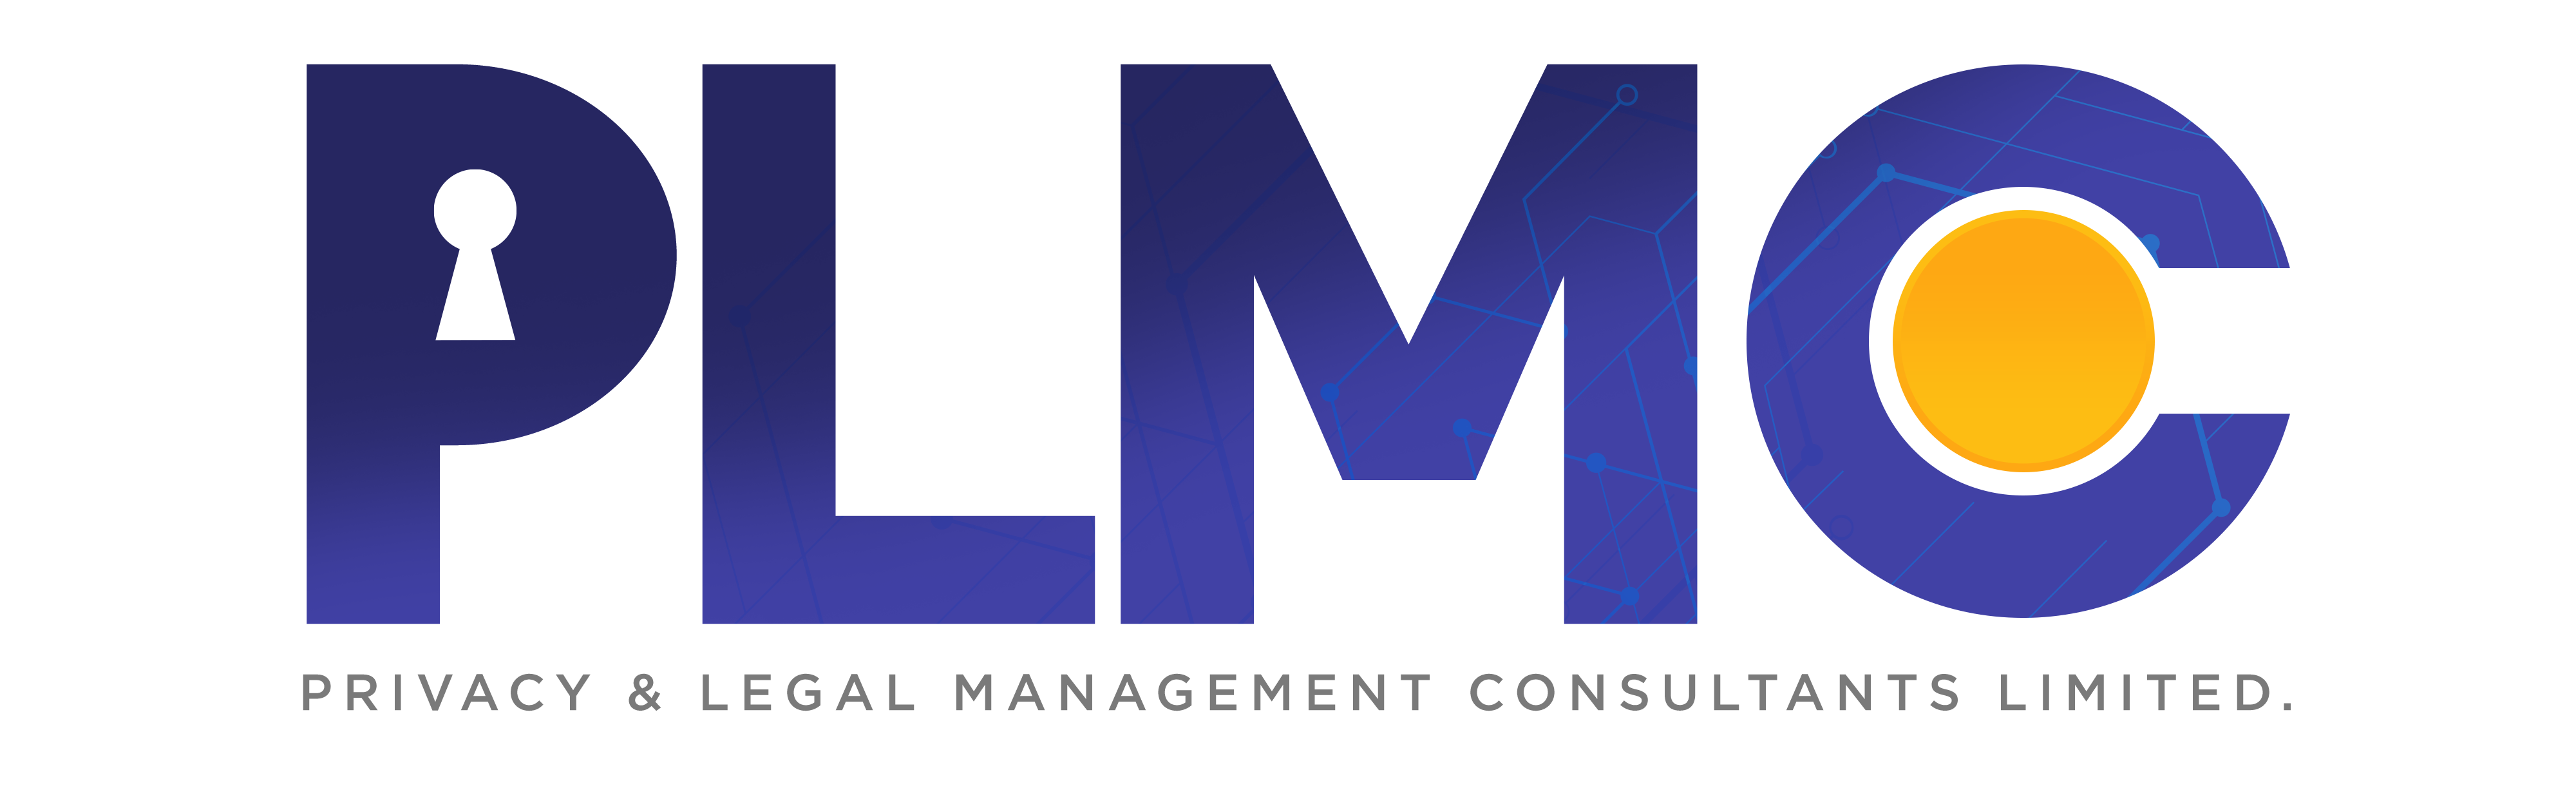 Privacy and Legal Management Consultants Limited